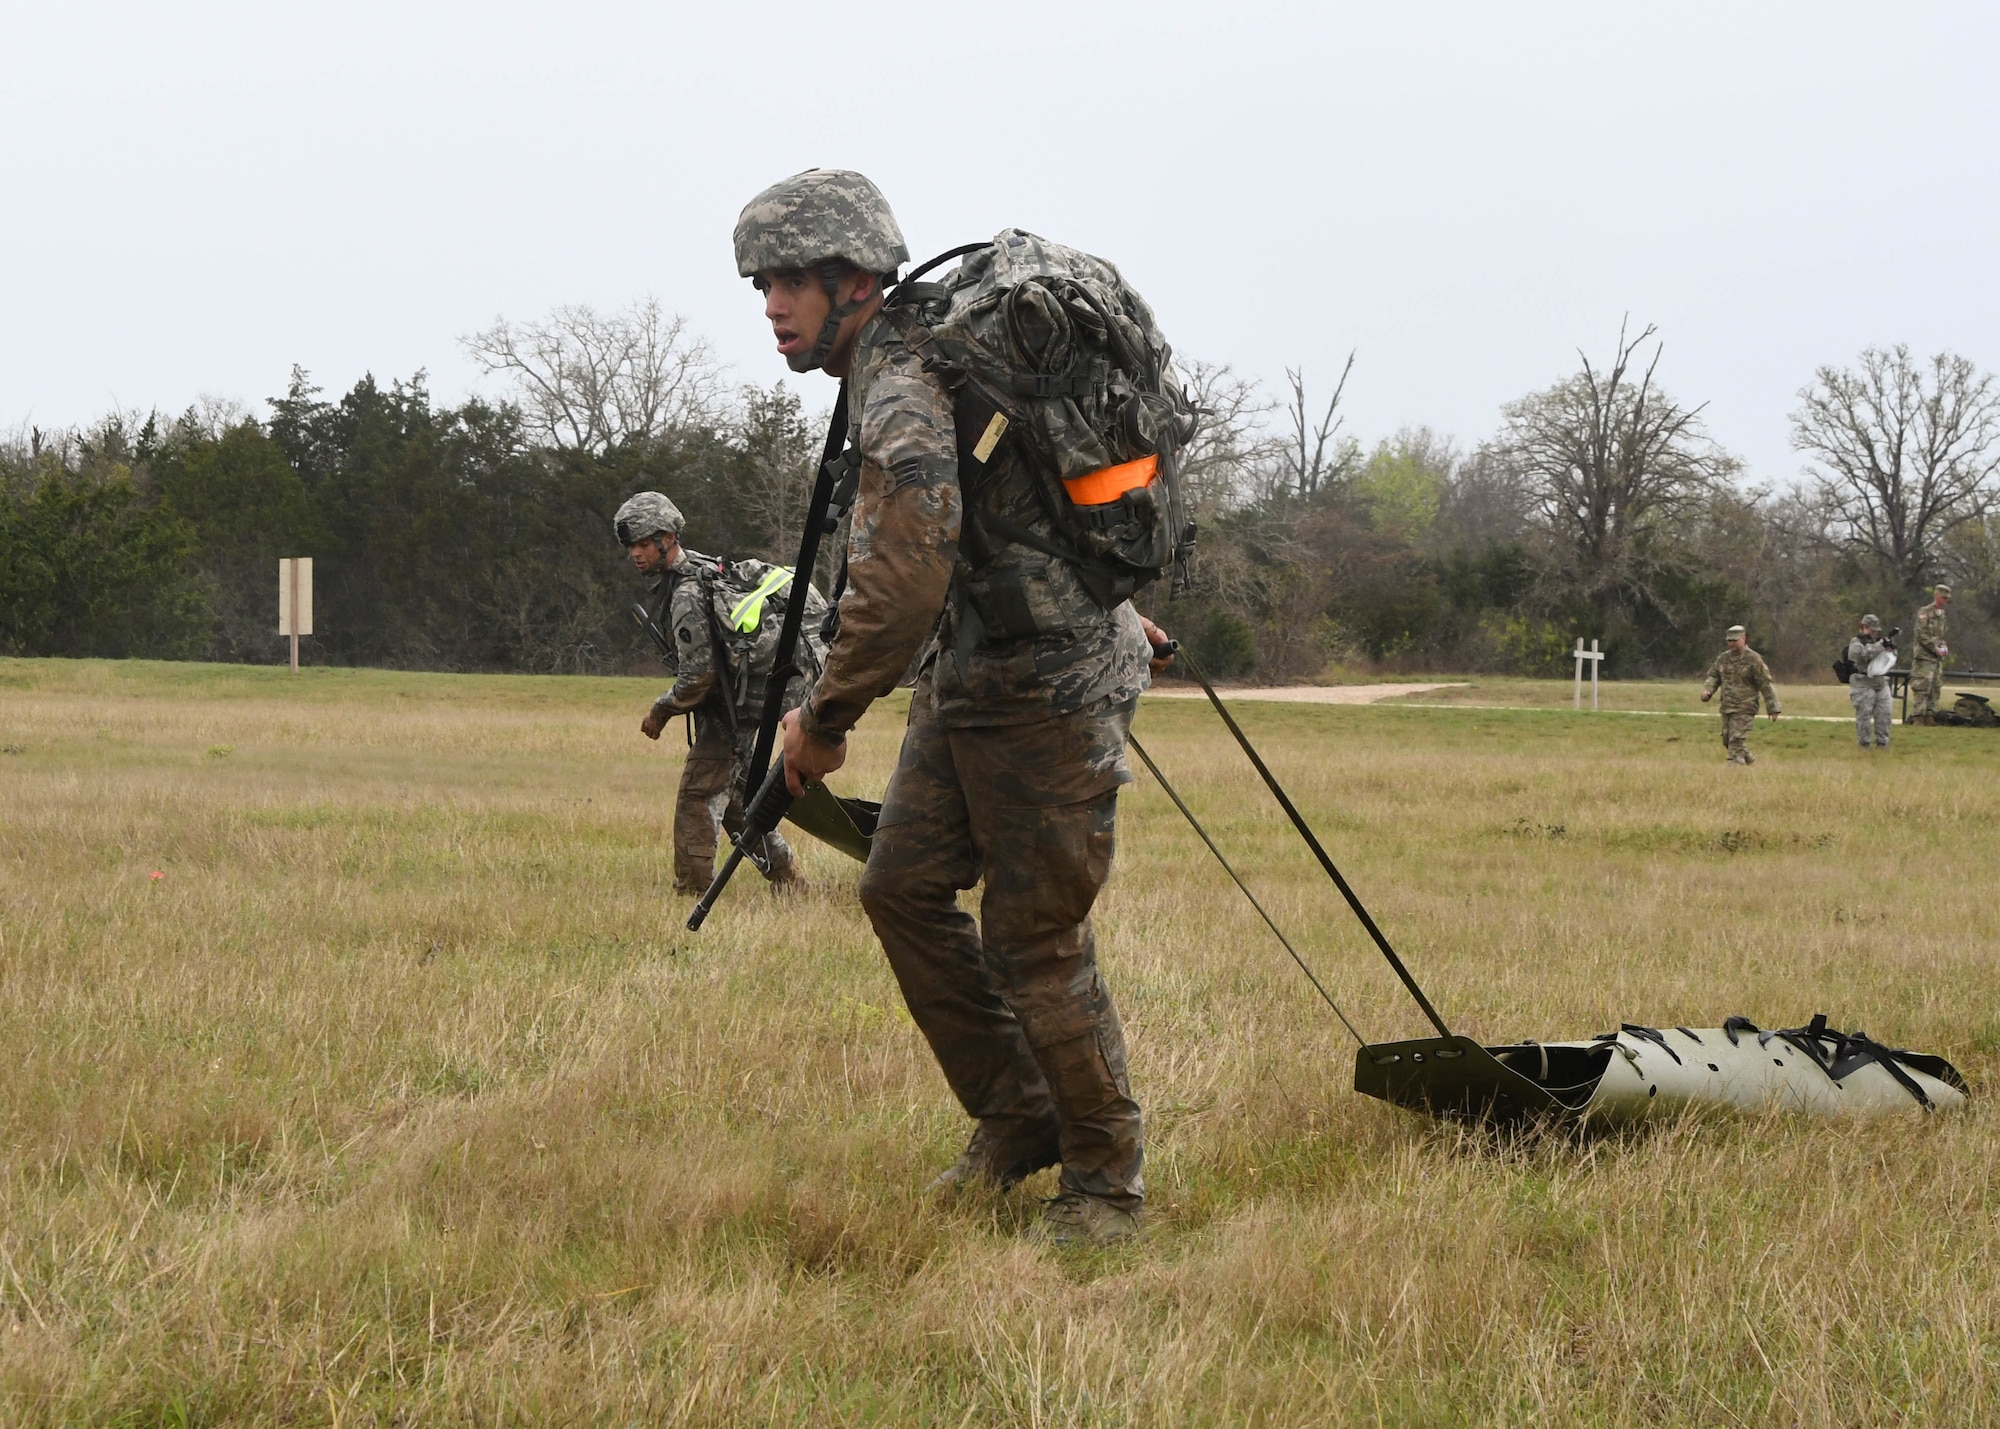 U.S. Air Force Senior Airman Orlando Duarte, an aerospace propulsion mechanic with the 149th Fighter Wing, Texas Air National Guard, headquartered at Joint Base San Antonio-Lackland, Texas, pulls a weighted sled during the 2017 Texas Military Department’s Best Warrior Competition, March 4, 2017, Camp Swift, Bastrop, Texas. The sled pull was an obstacle that was a part of the mystery event at the BWC. (Air National Guard photo by Senior Airman De’Jon Williams)